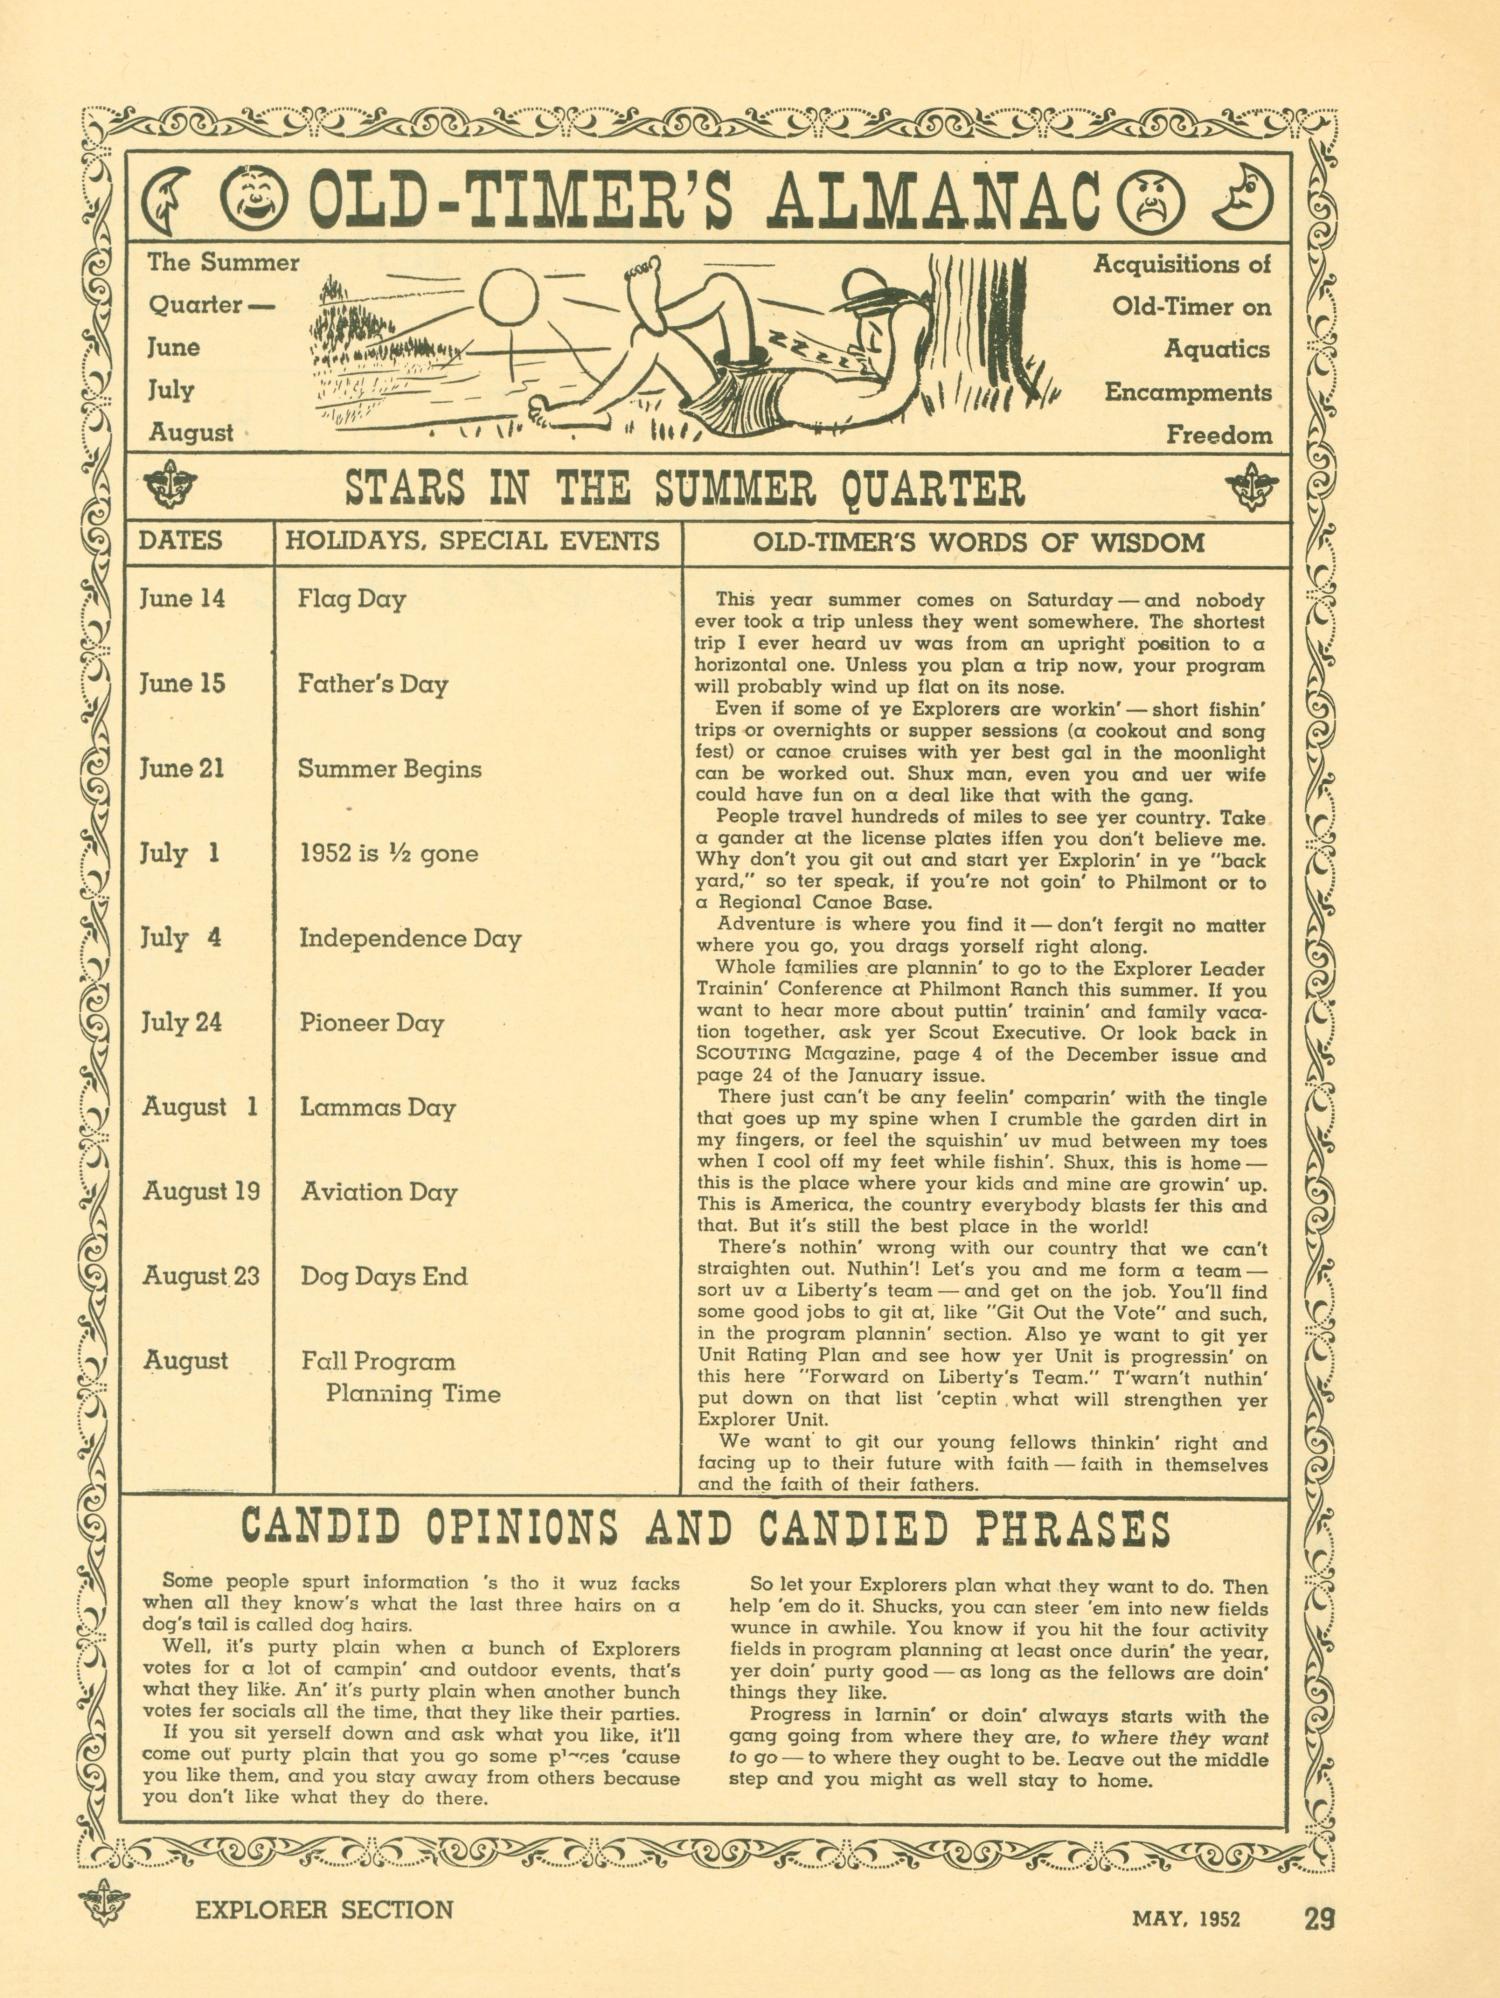 Scouting, Volume 40, Number 5, May 1952
                                                
                                                    29
                                                